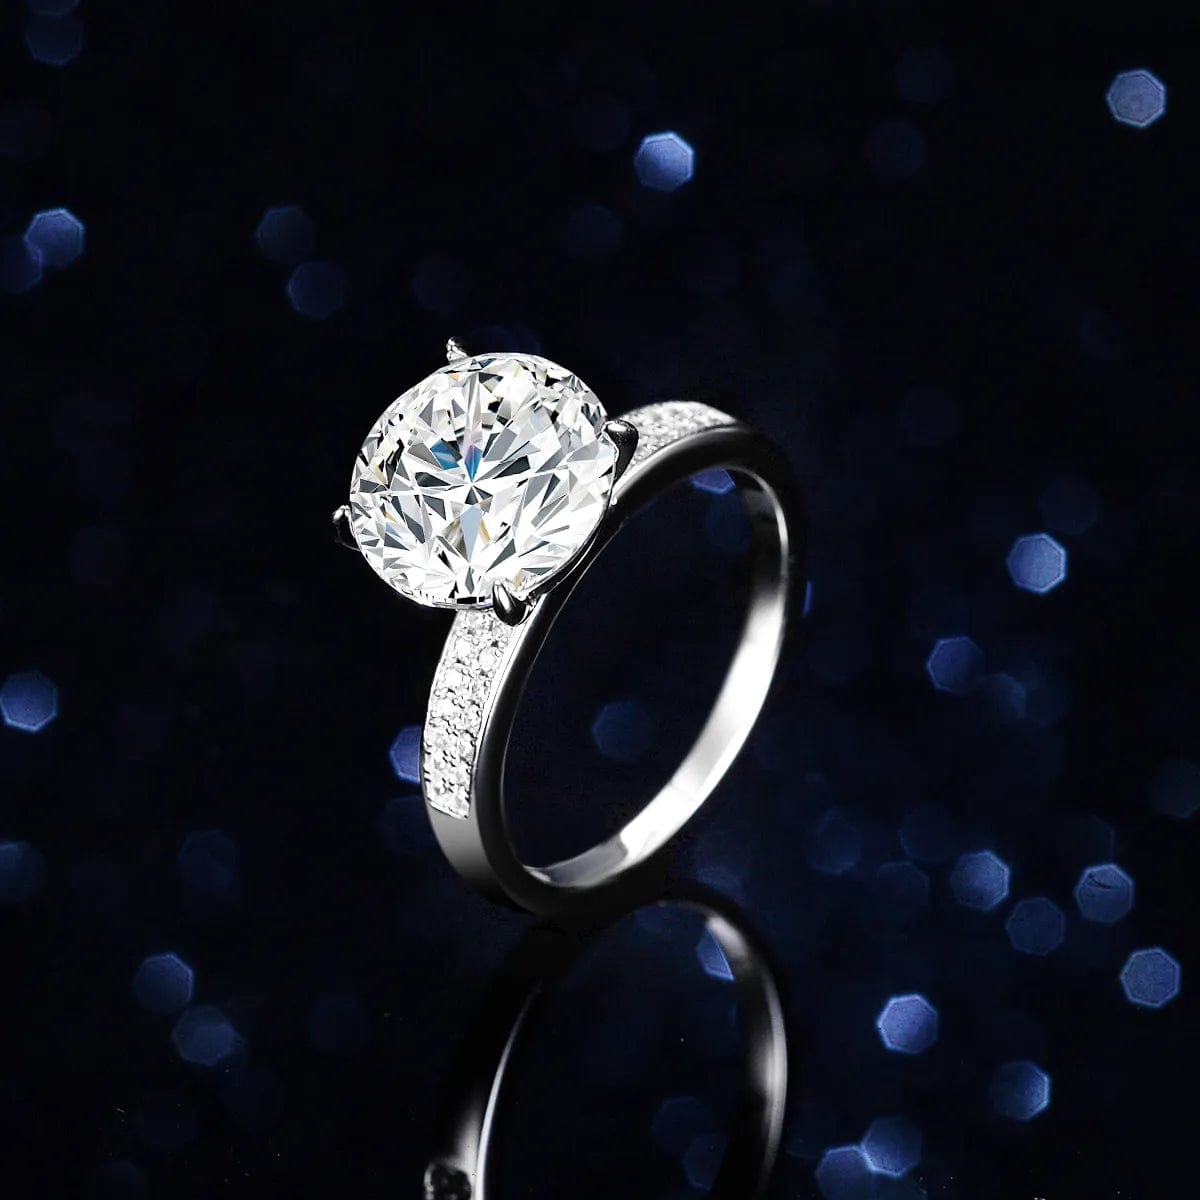 VVS Jewelry hip hop jewelry Radiant Sparkle 5CT 925 Sterling Silver Moissanite Engagement Ring